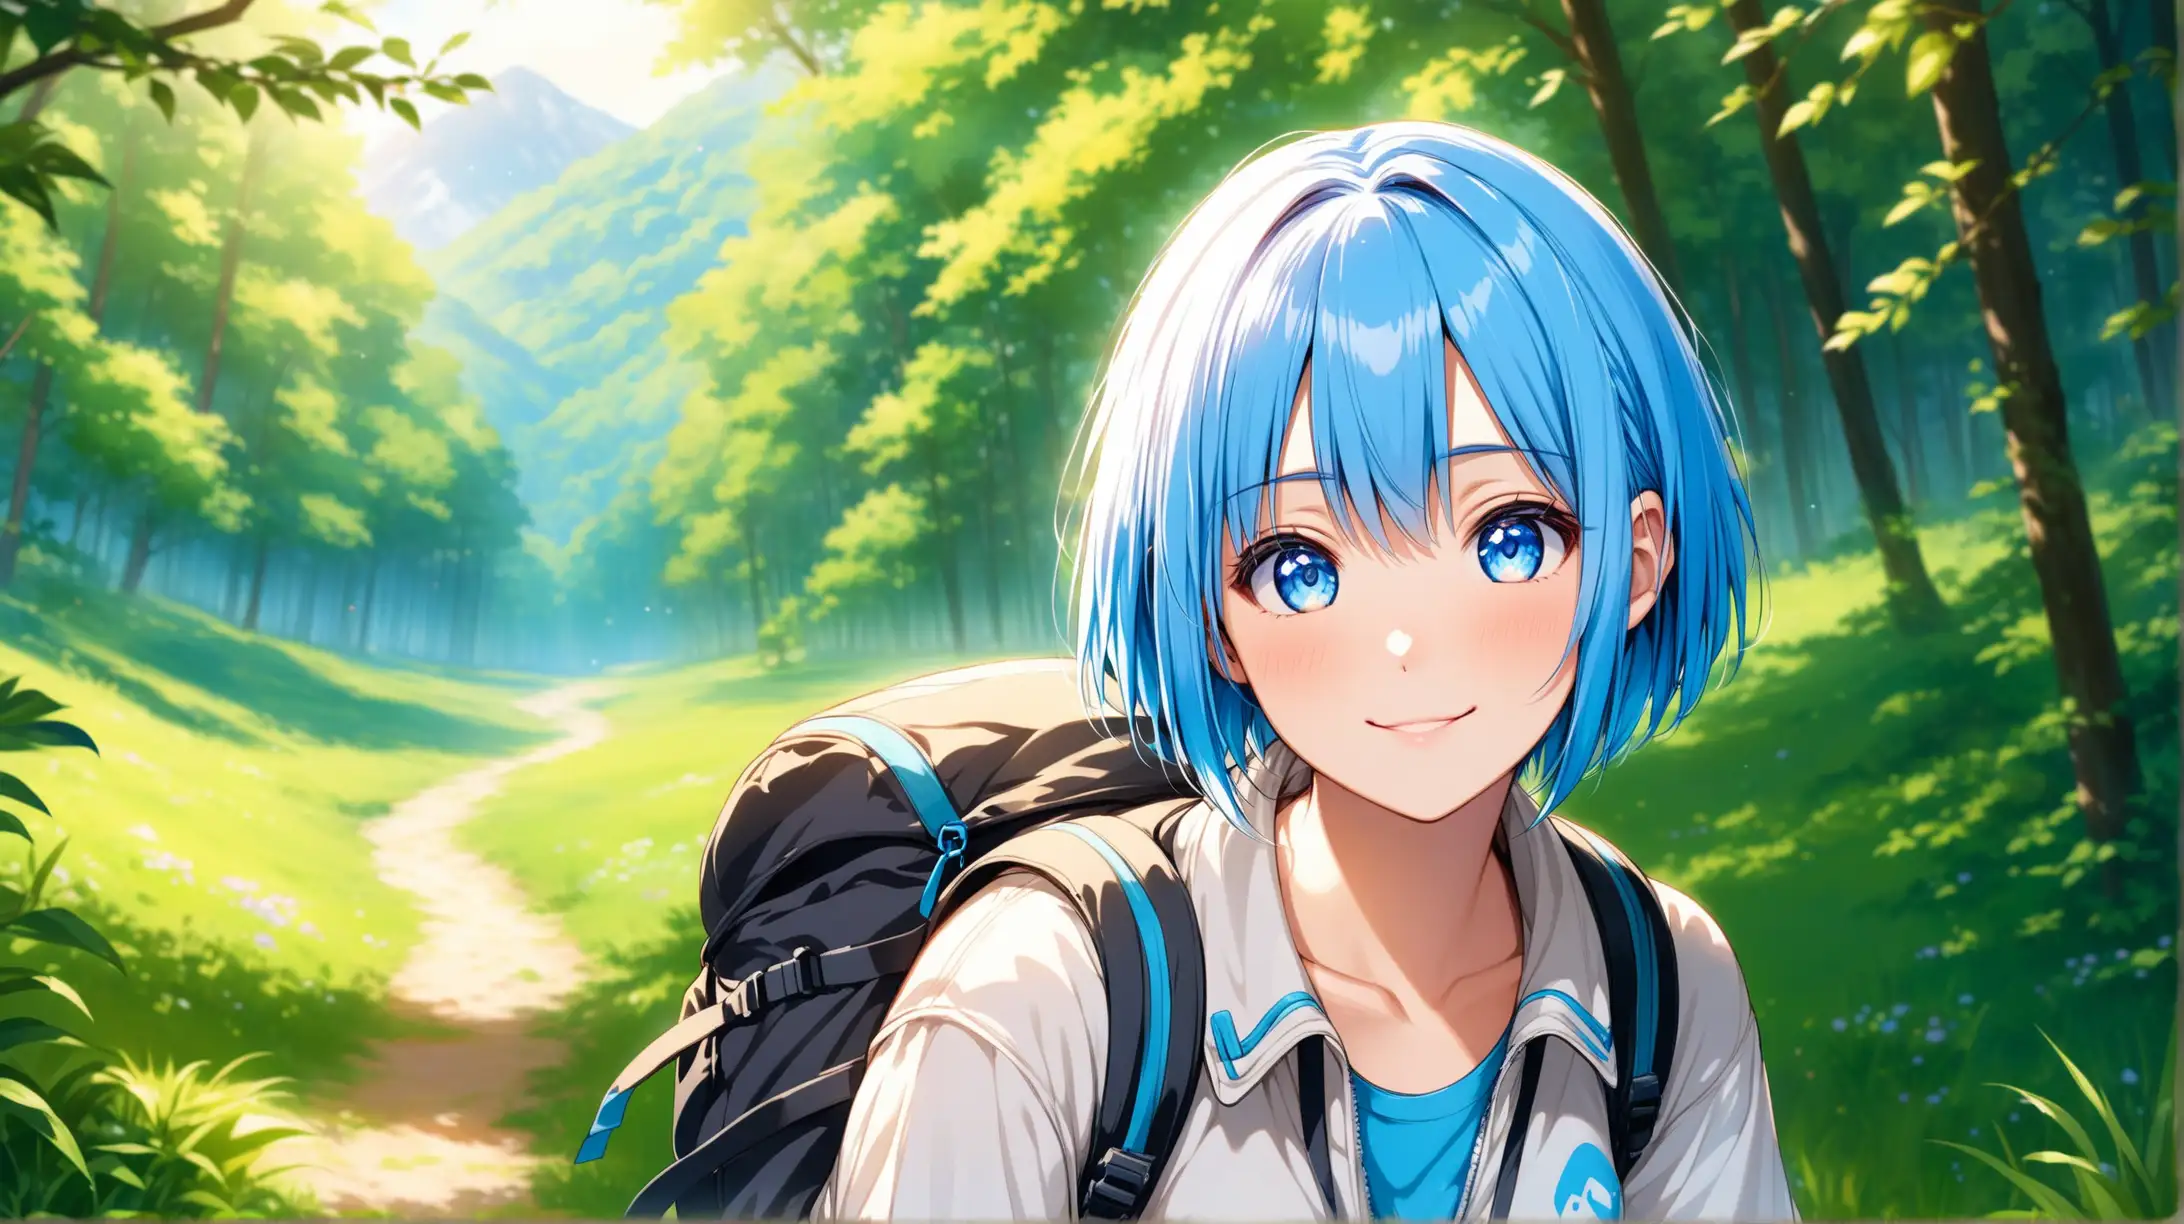 Draw the character Rem, blue eyes, high quality, outdoors, glade, natural lighting, medium shot, in a relaxed pose, wearing a hiking outfit, looking at the viewer with a loving smile